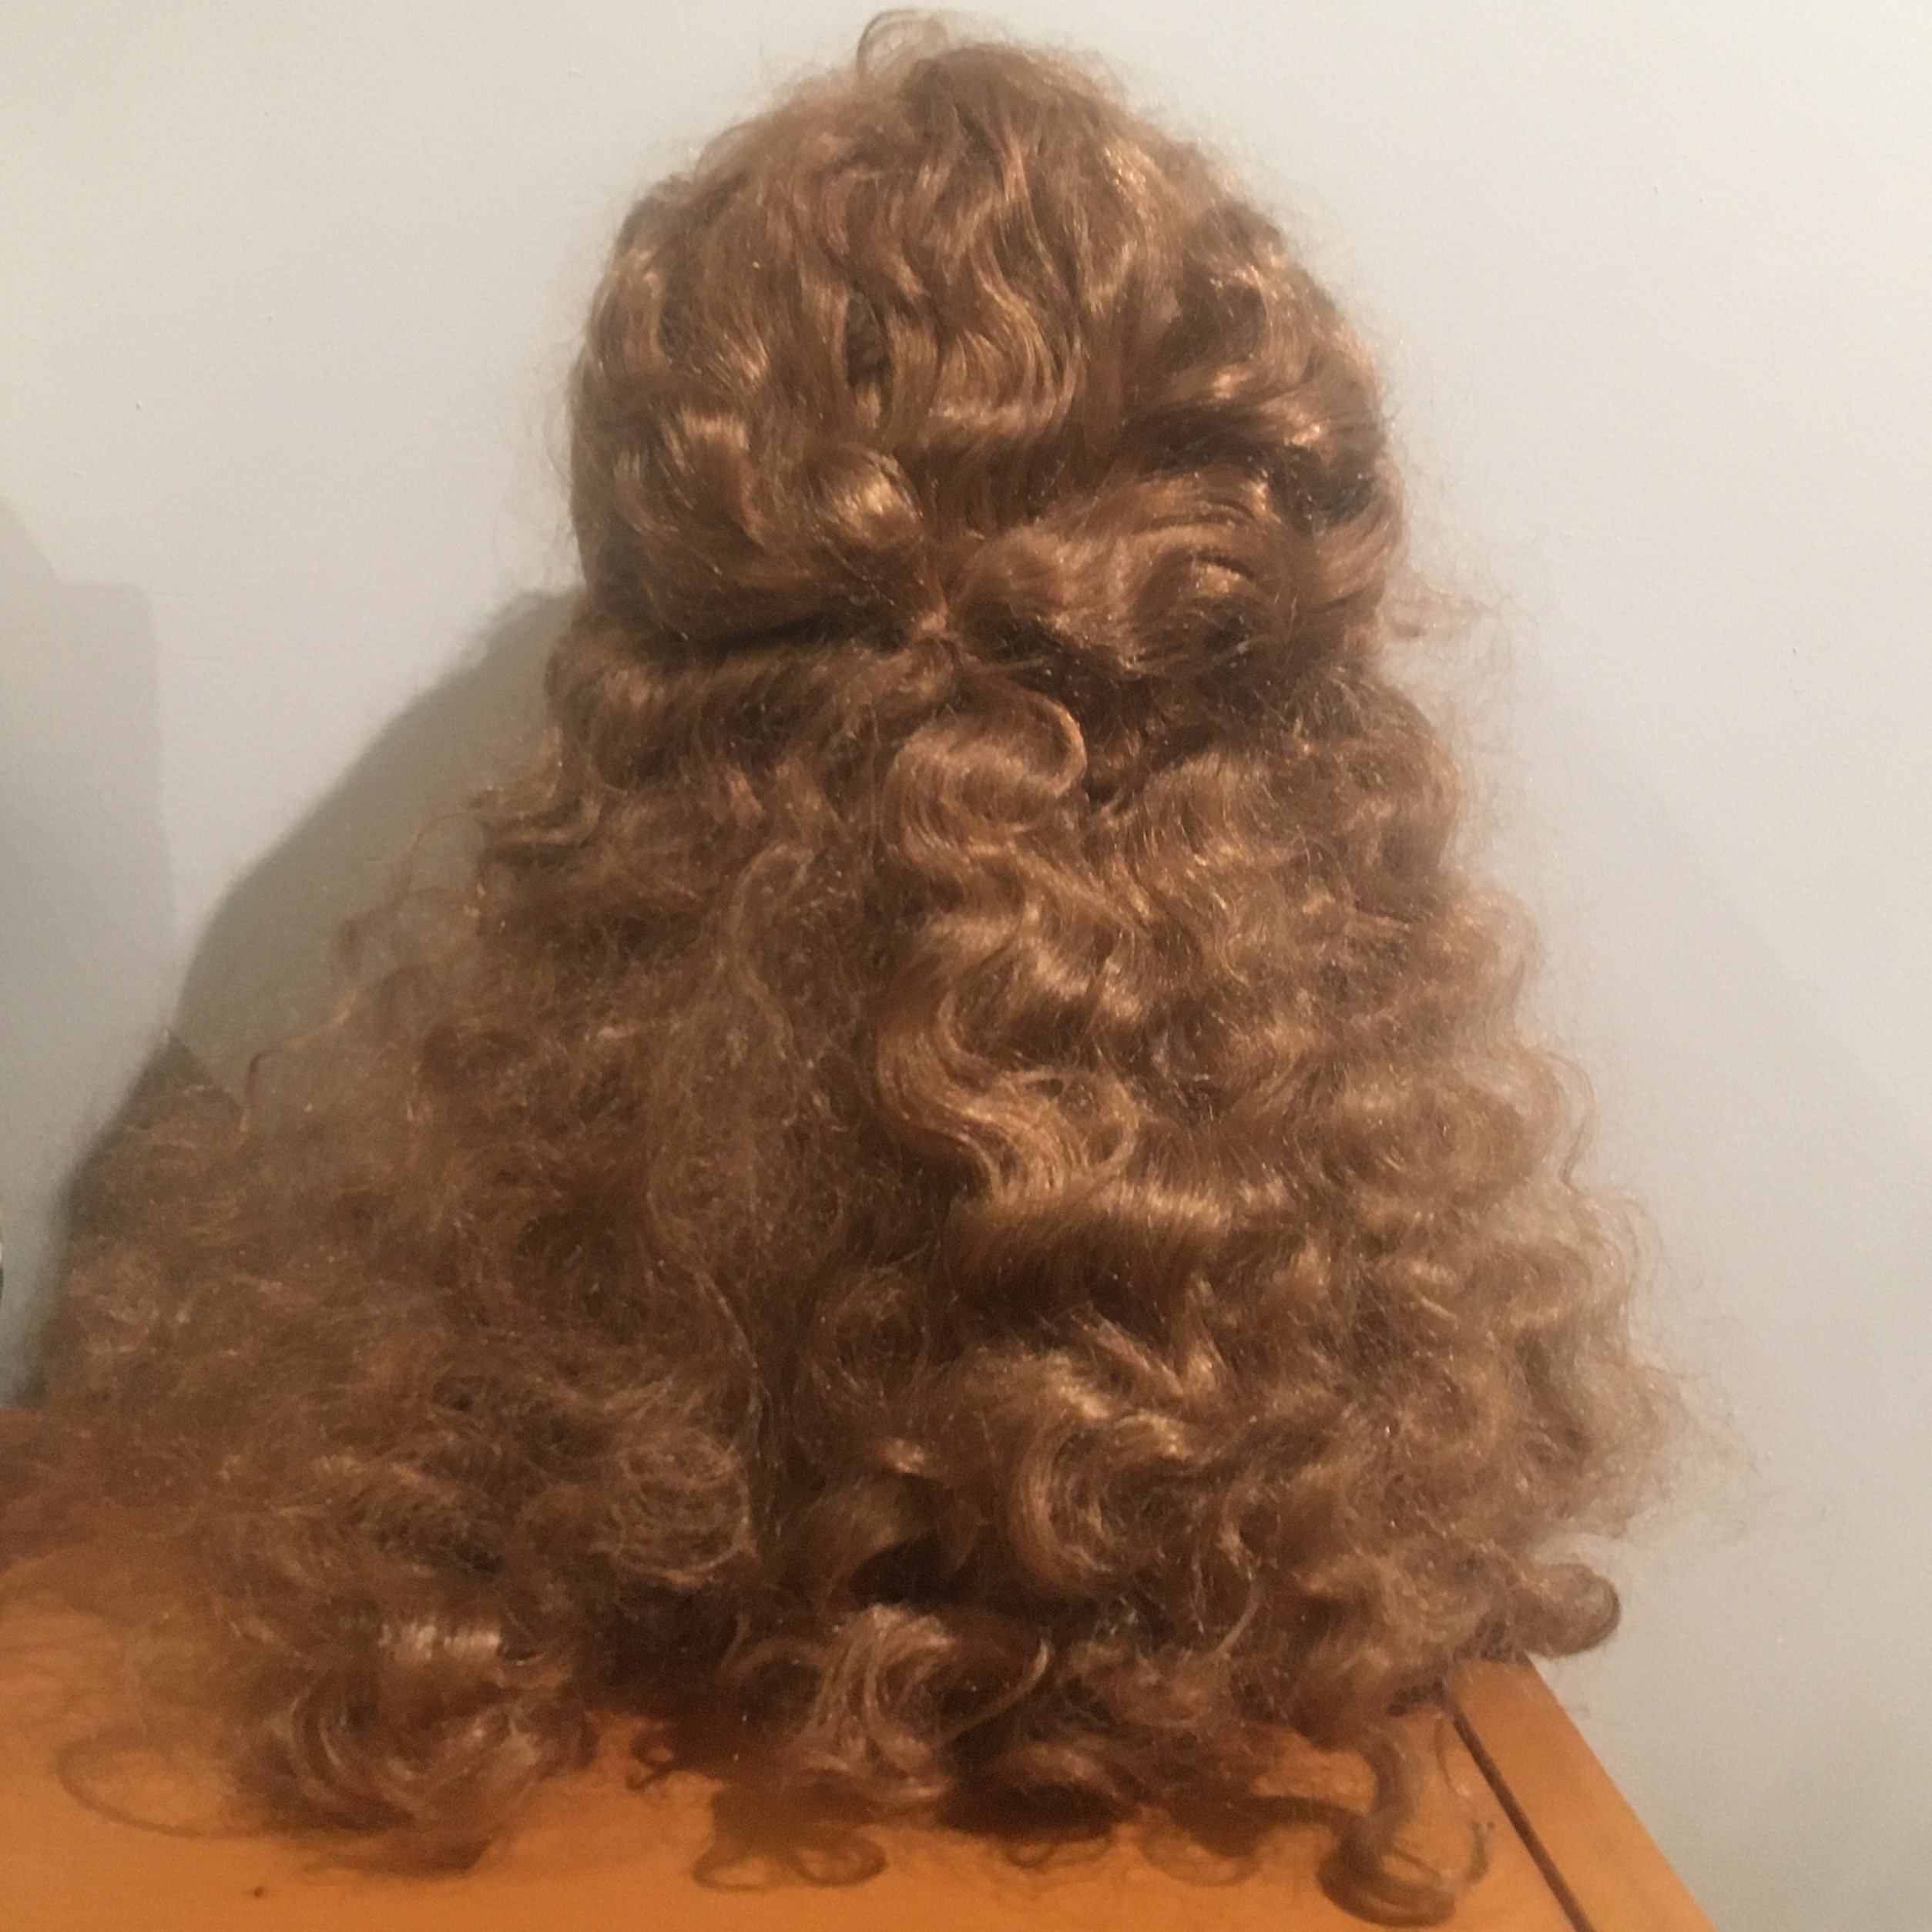 Very long, curly strawberry blond wig with short bangs and two front pieces tied together in the back